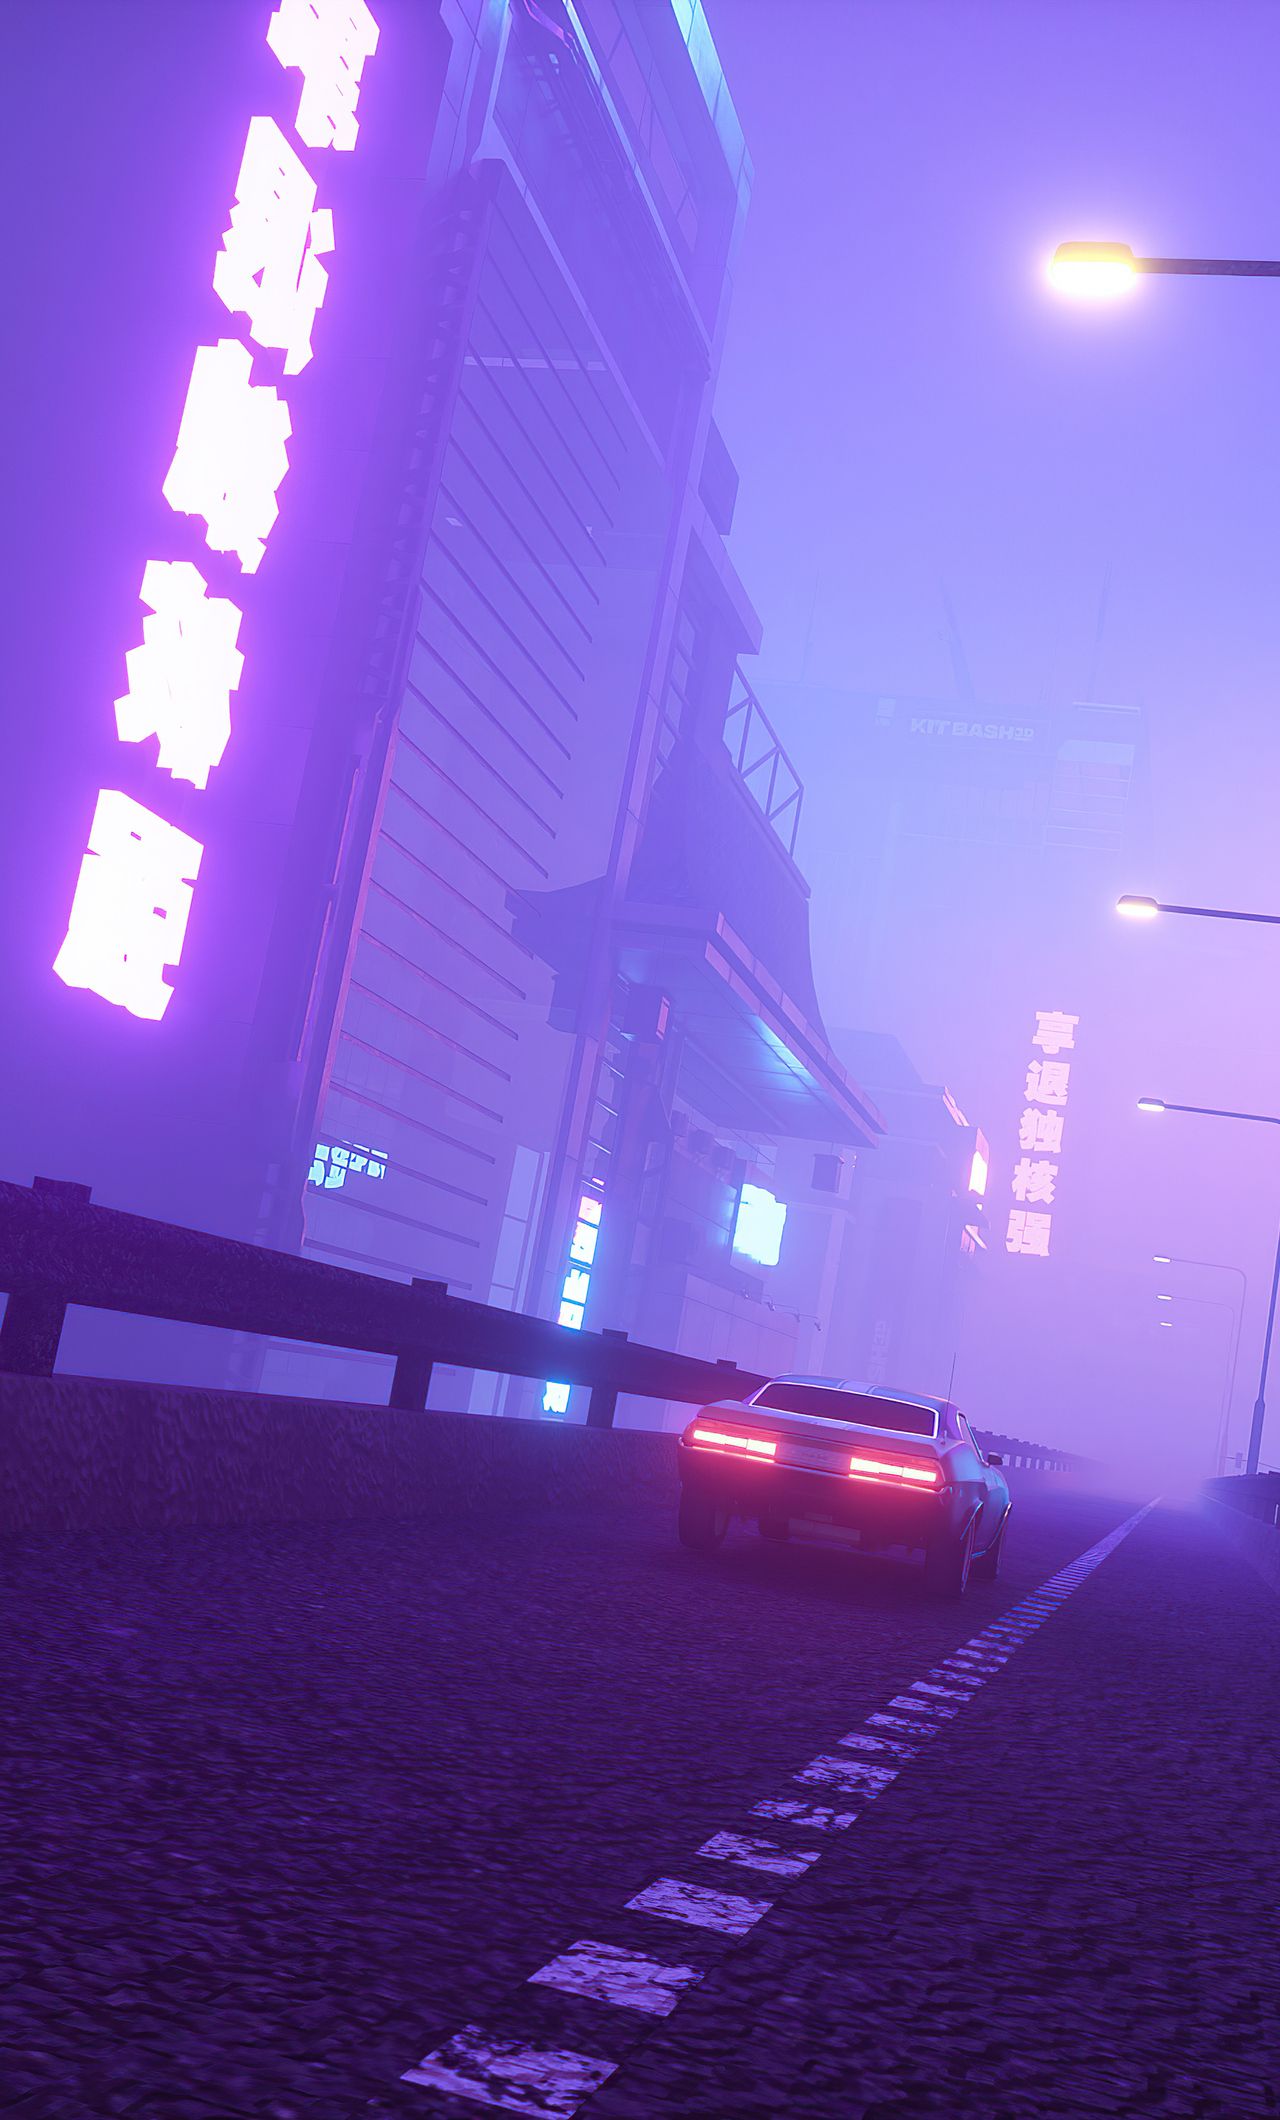 A car with glowing red lights drives down a street in a cyberpunk city - Cyberpunk